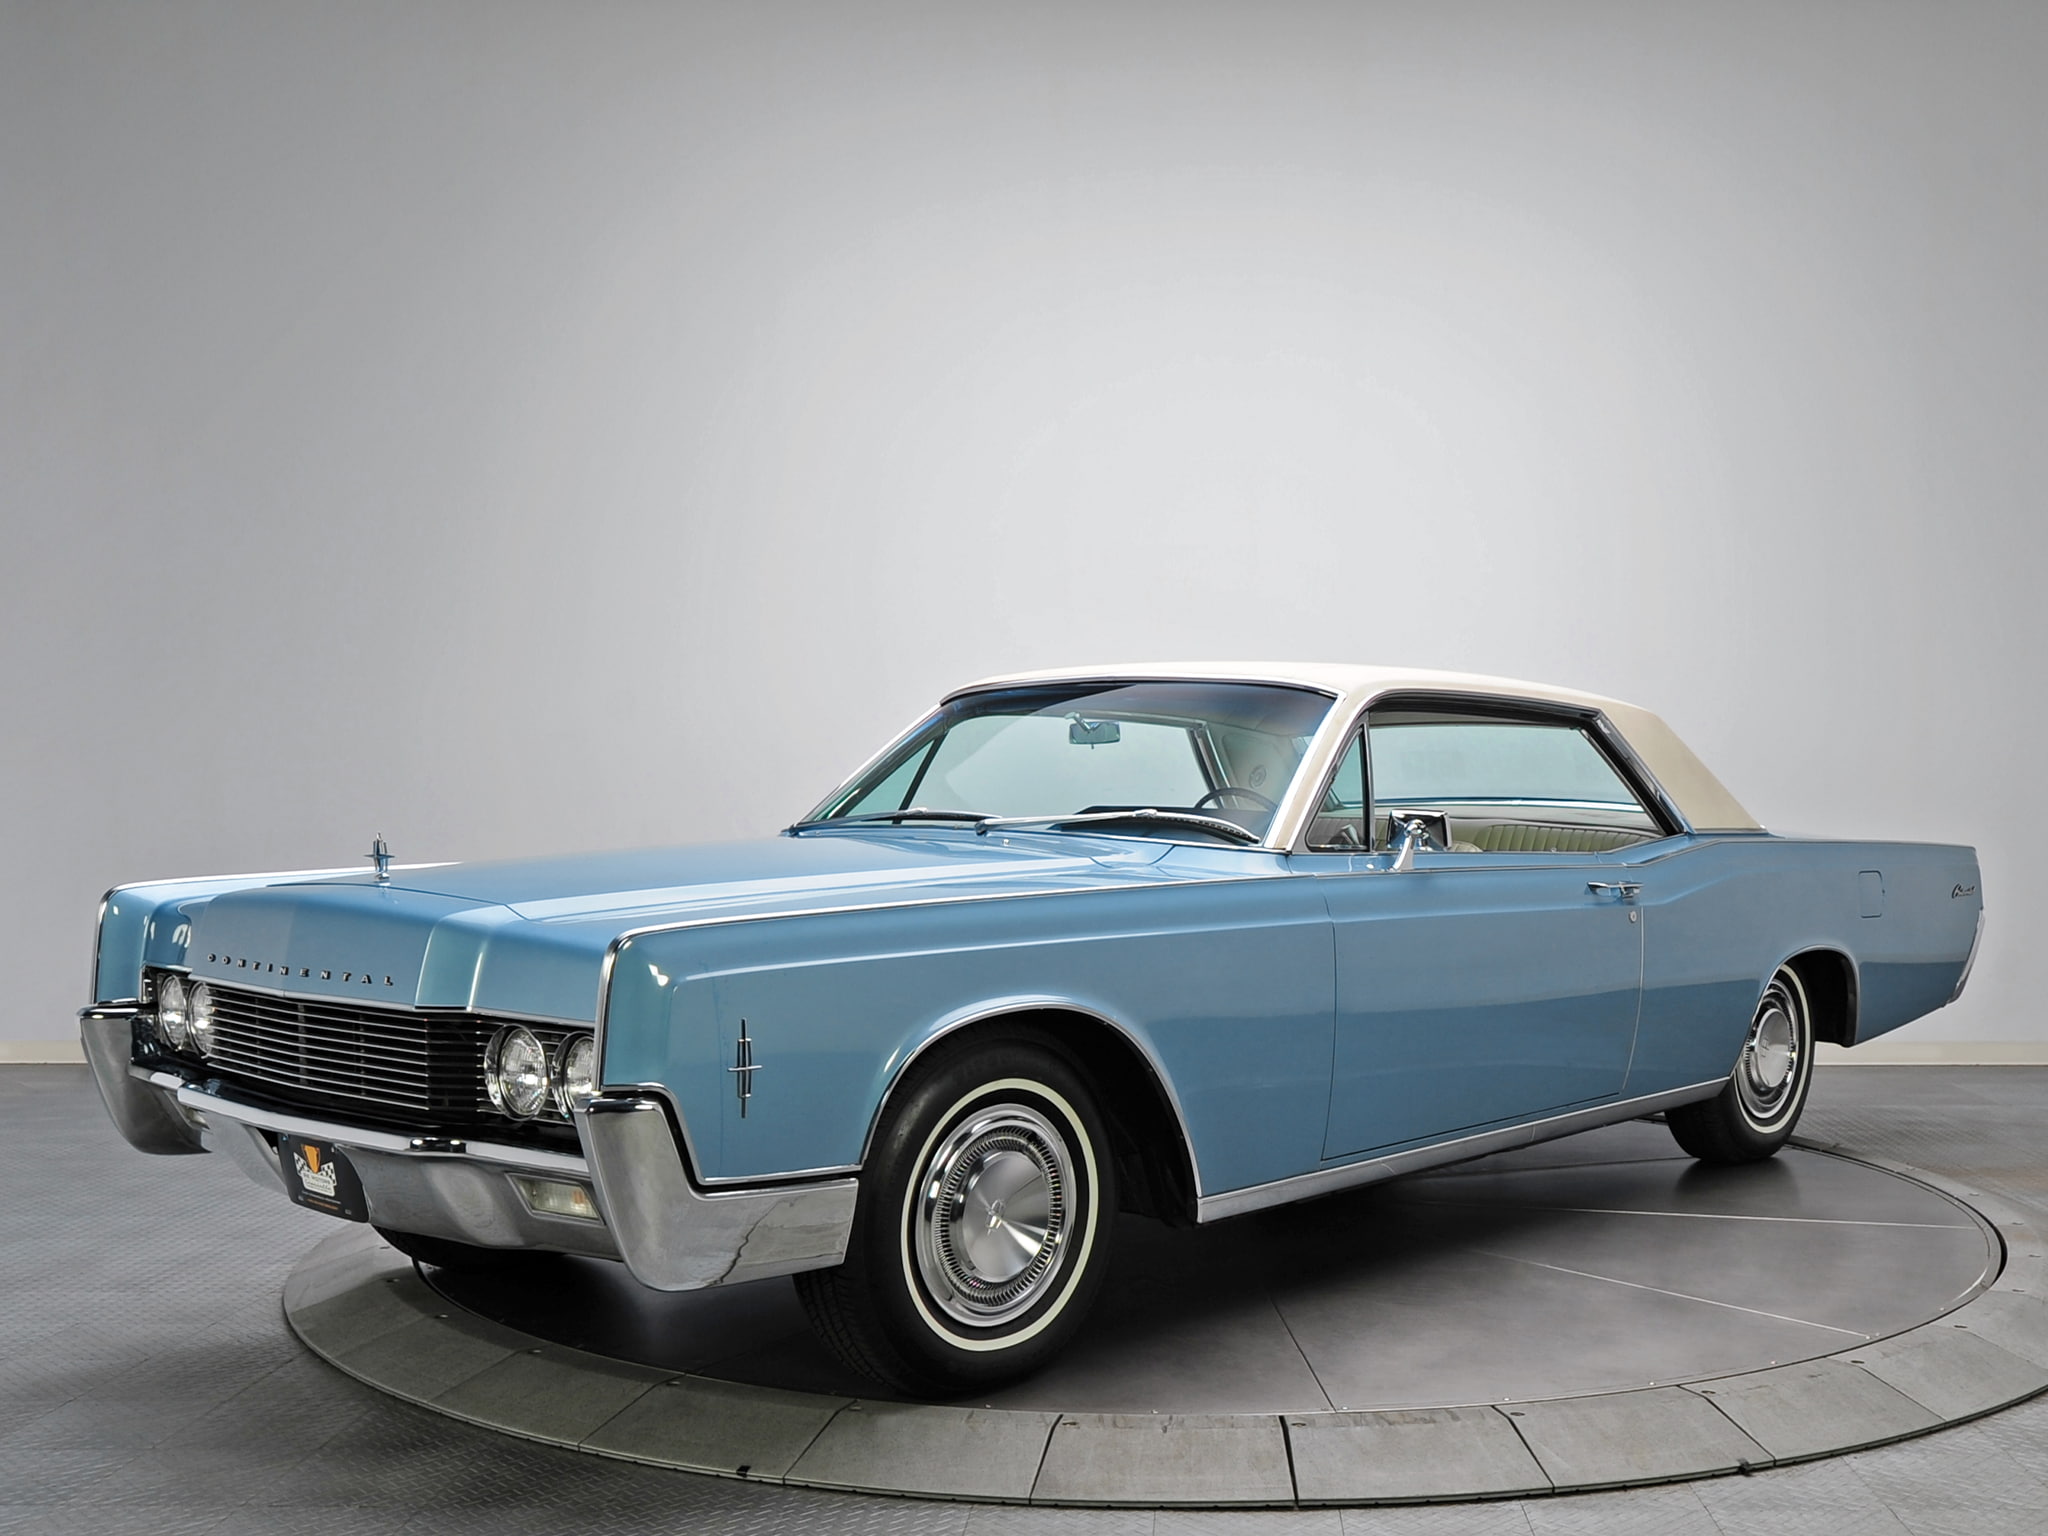 1966, classic, continental, coupe, hardtop, lincoln, luxury